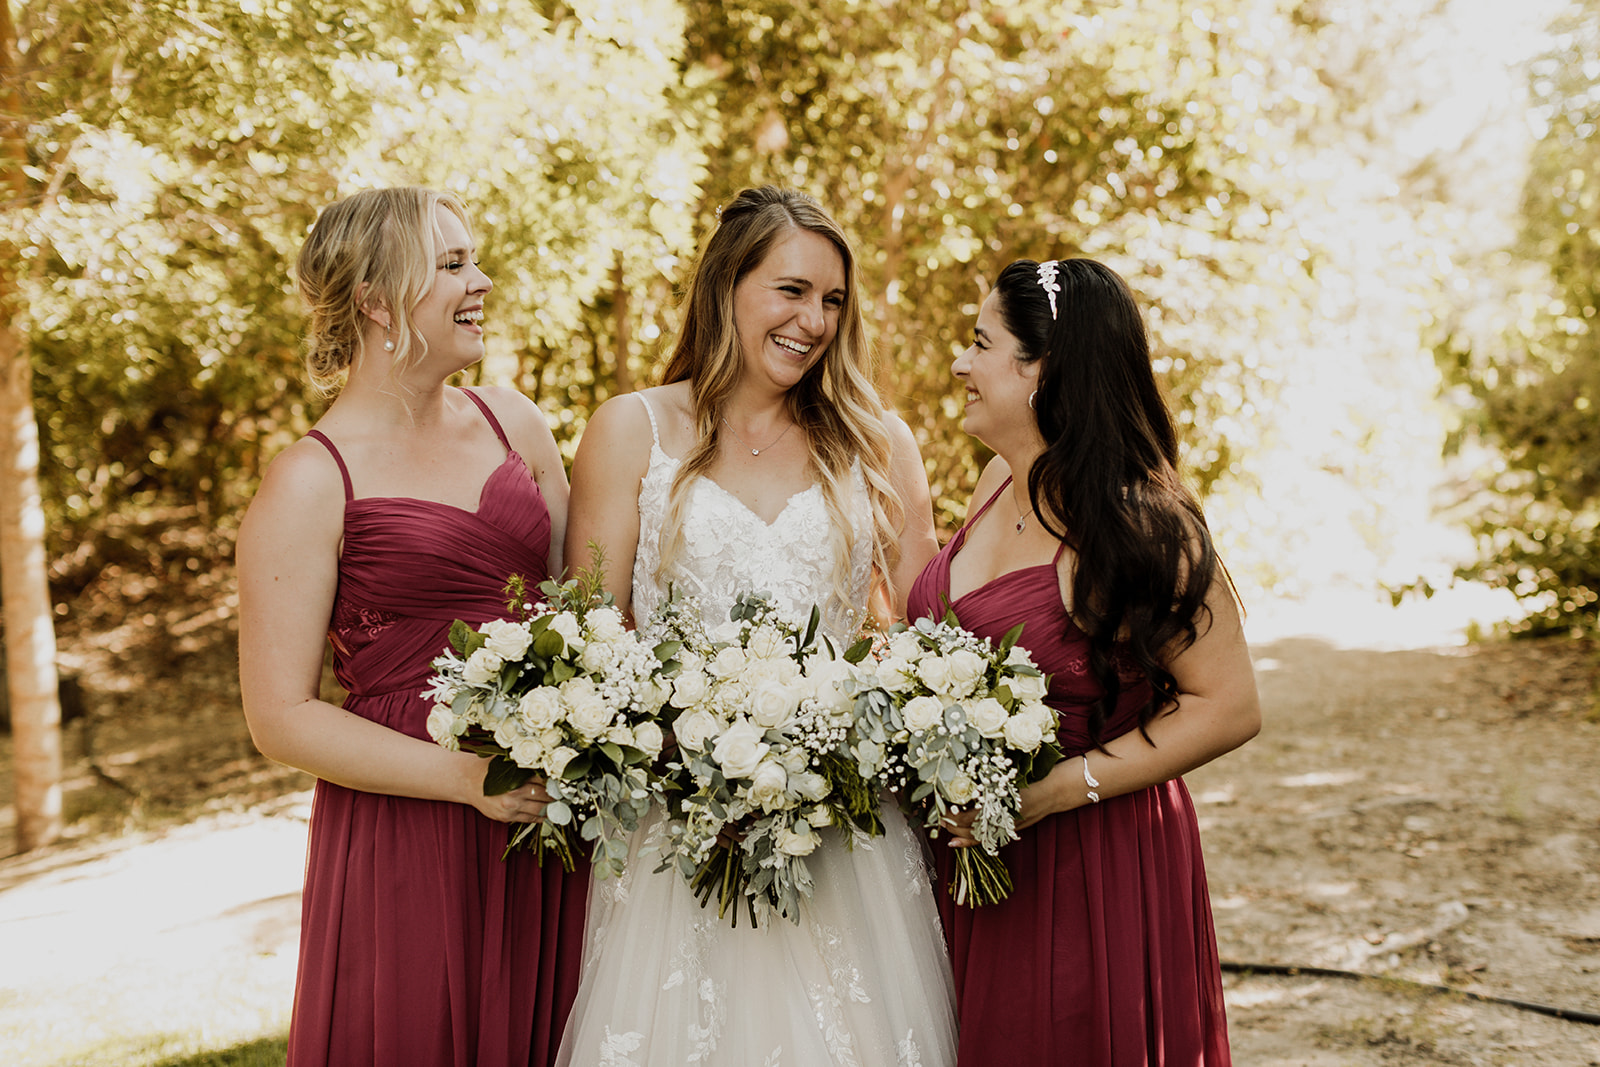 Hartley Farms Wedding Photo and Video: Cherish Every Moment